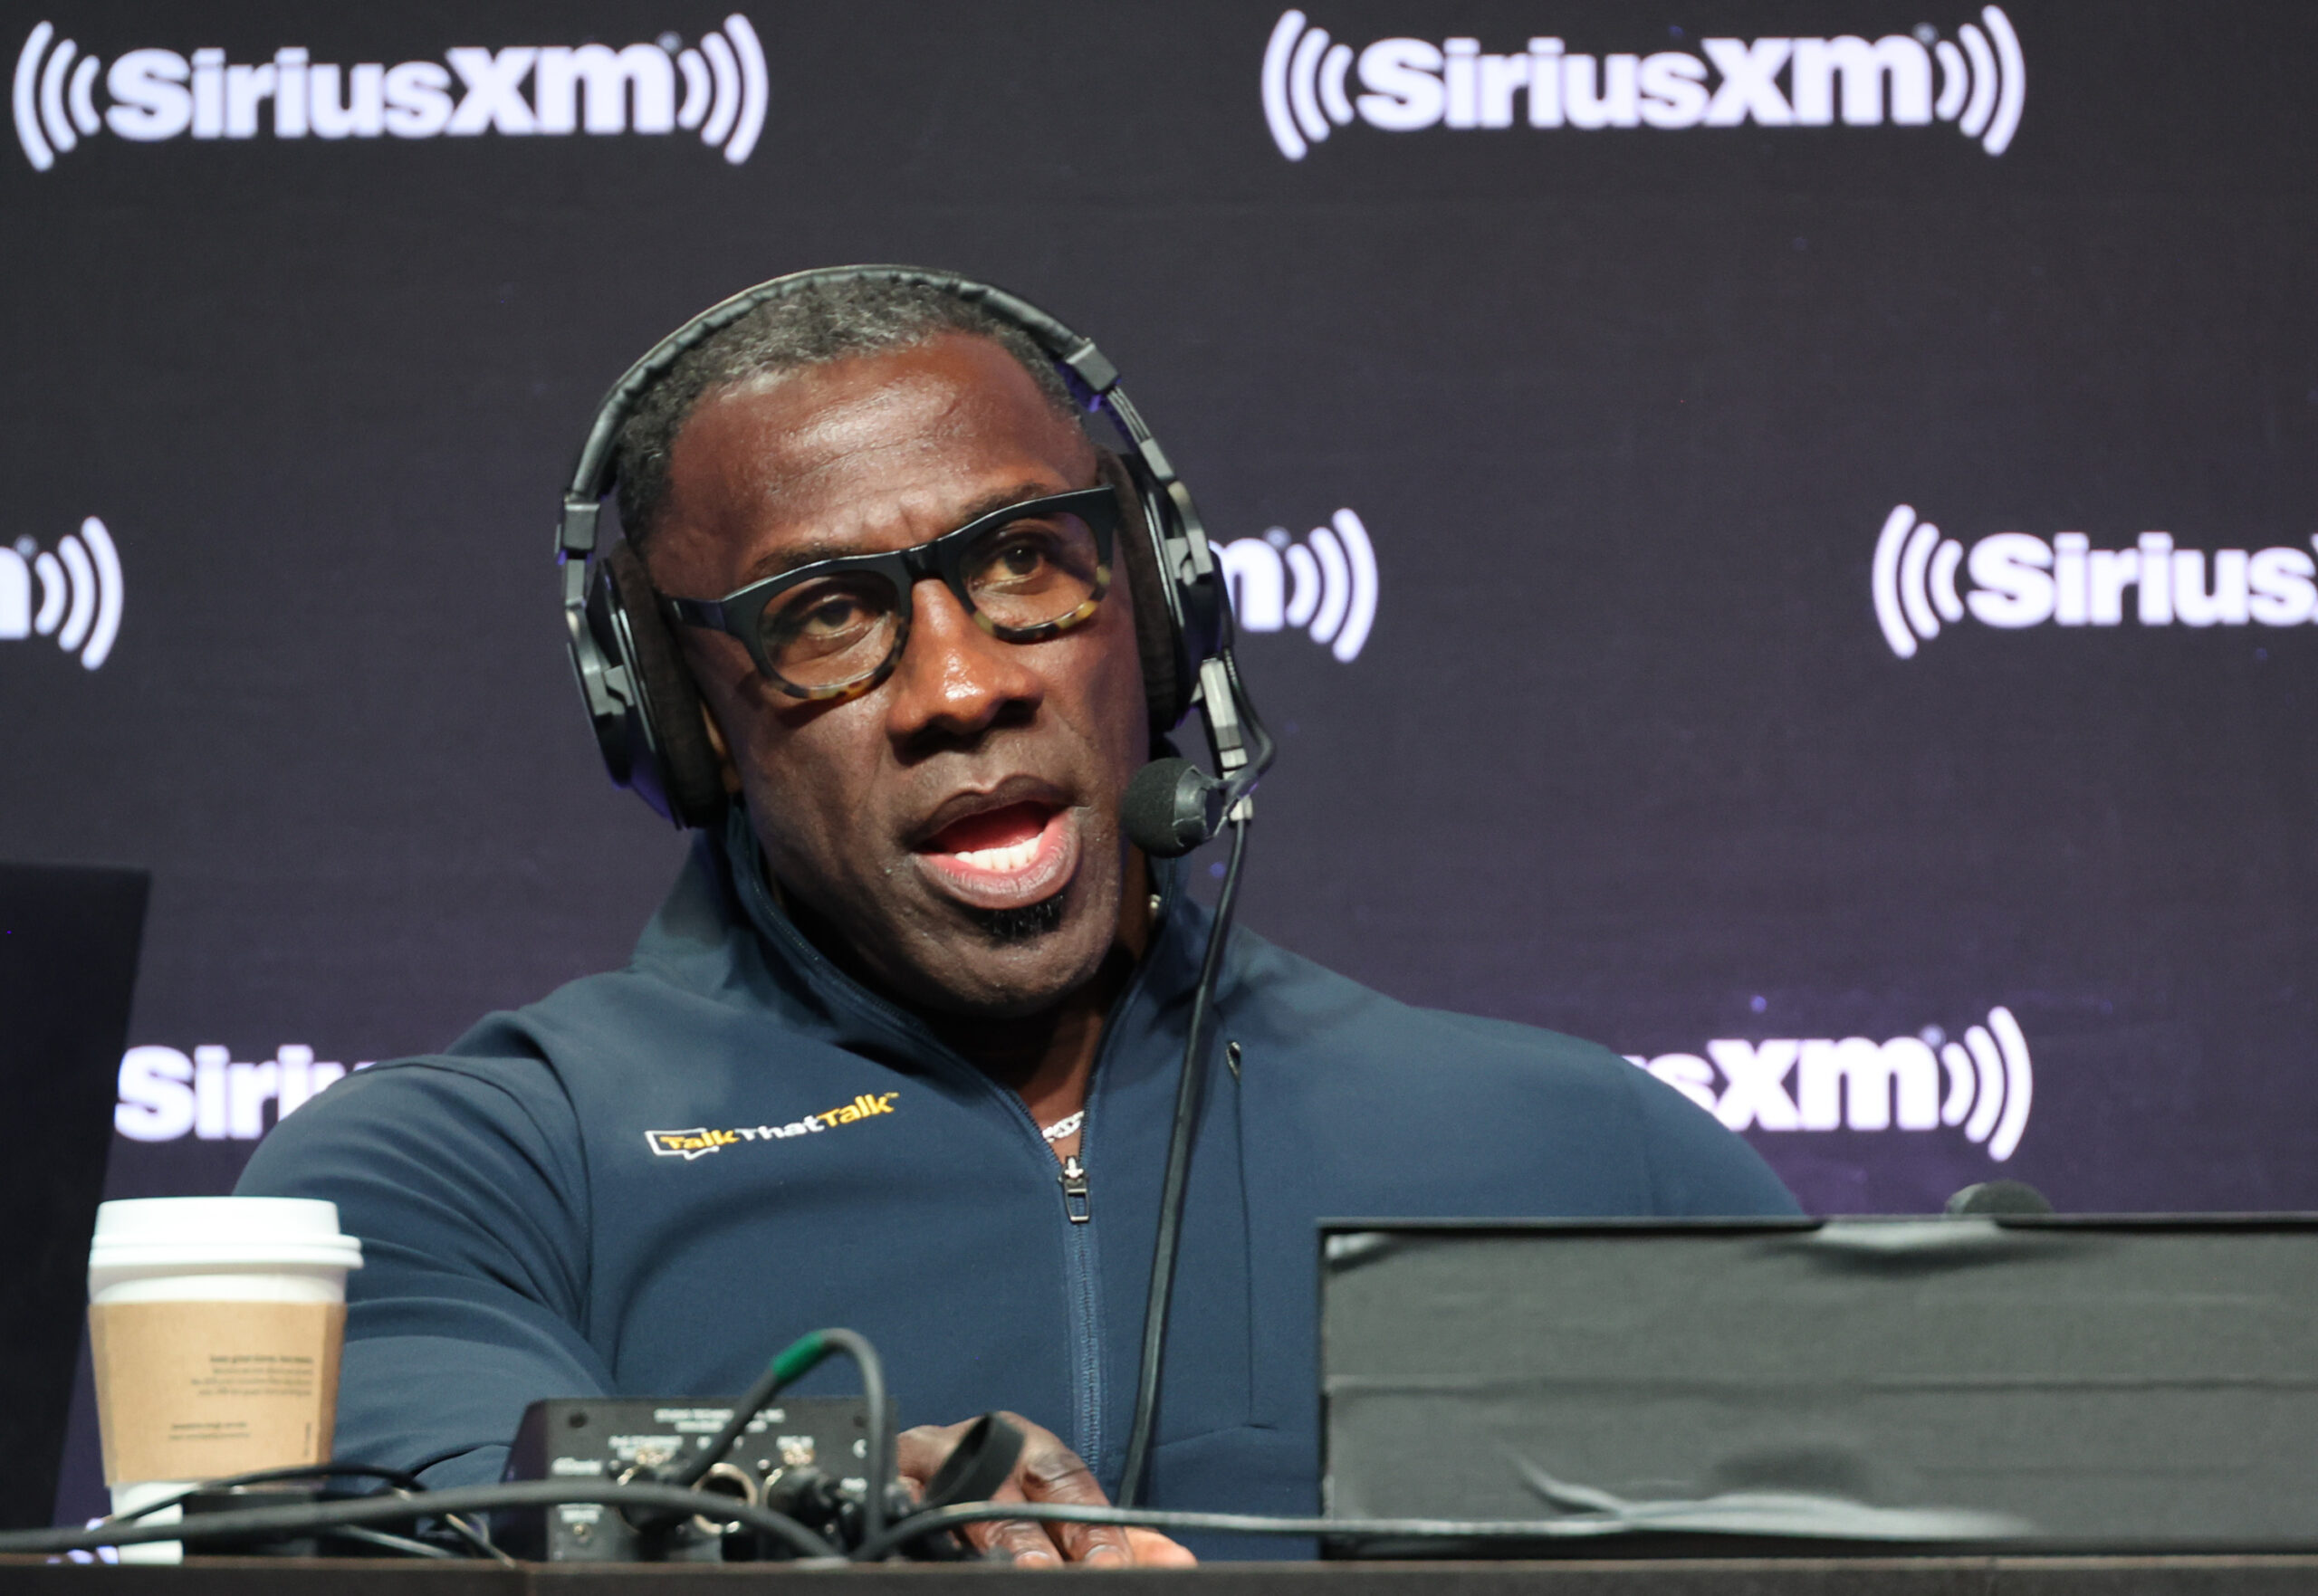 Shannon Sharpe Delivers Tearful Goodbye To Skip Bayless & "Undisputed"